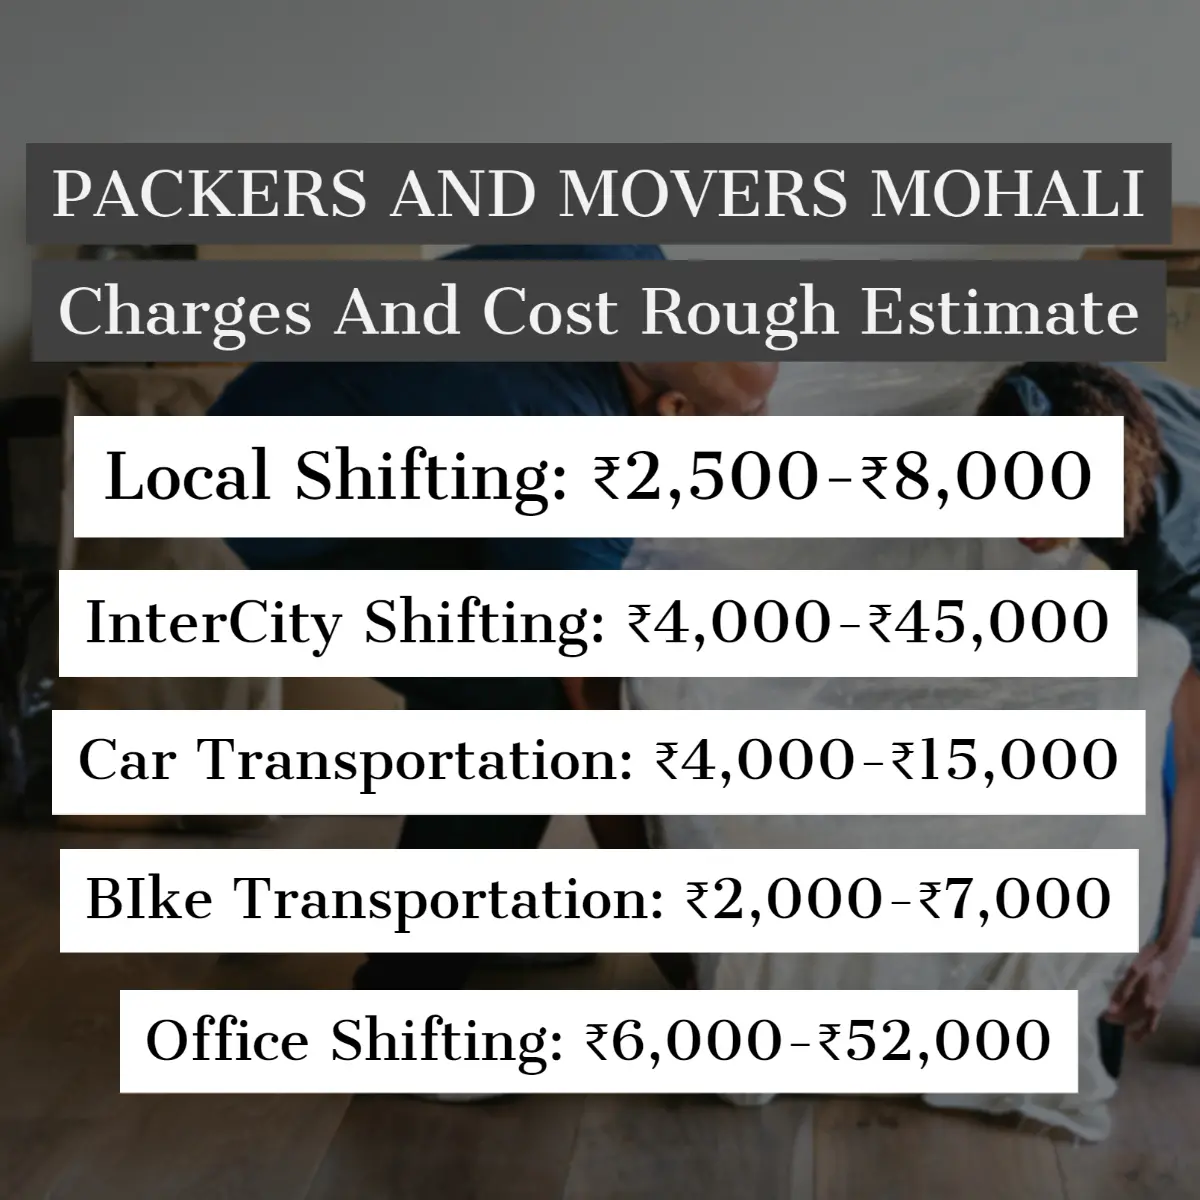 Packers and Movers Mohali Charges